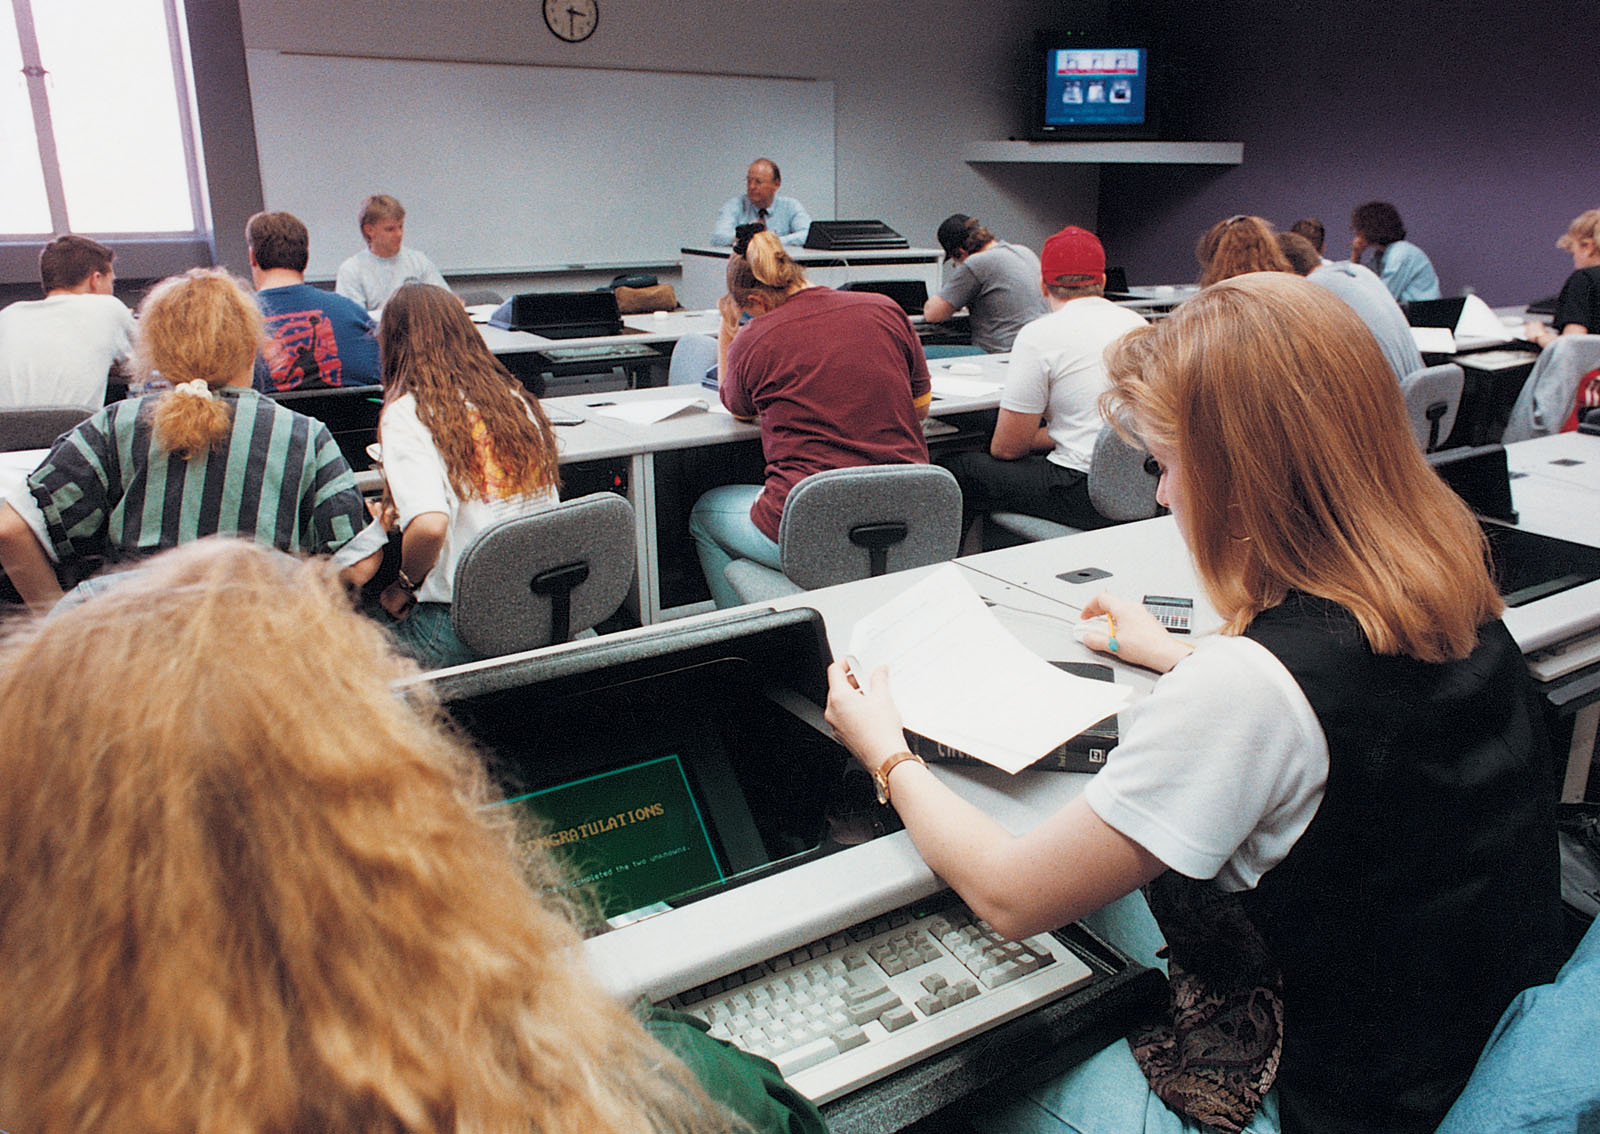 Students gathered in an early electronic classroom in the Garrett-Strong Science Building with Dr. Harlan Higginbotham teaching a general chemistry course.